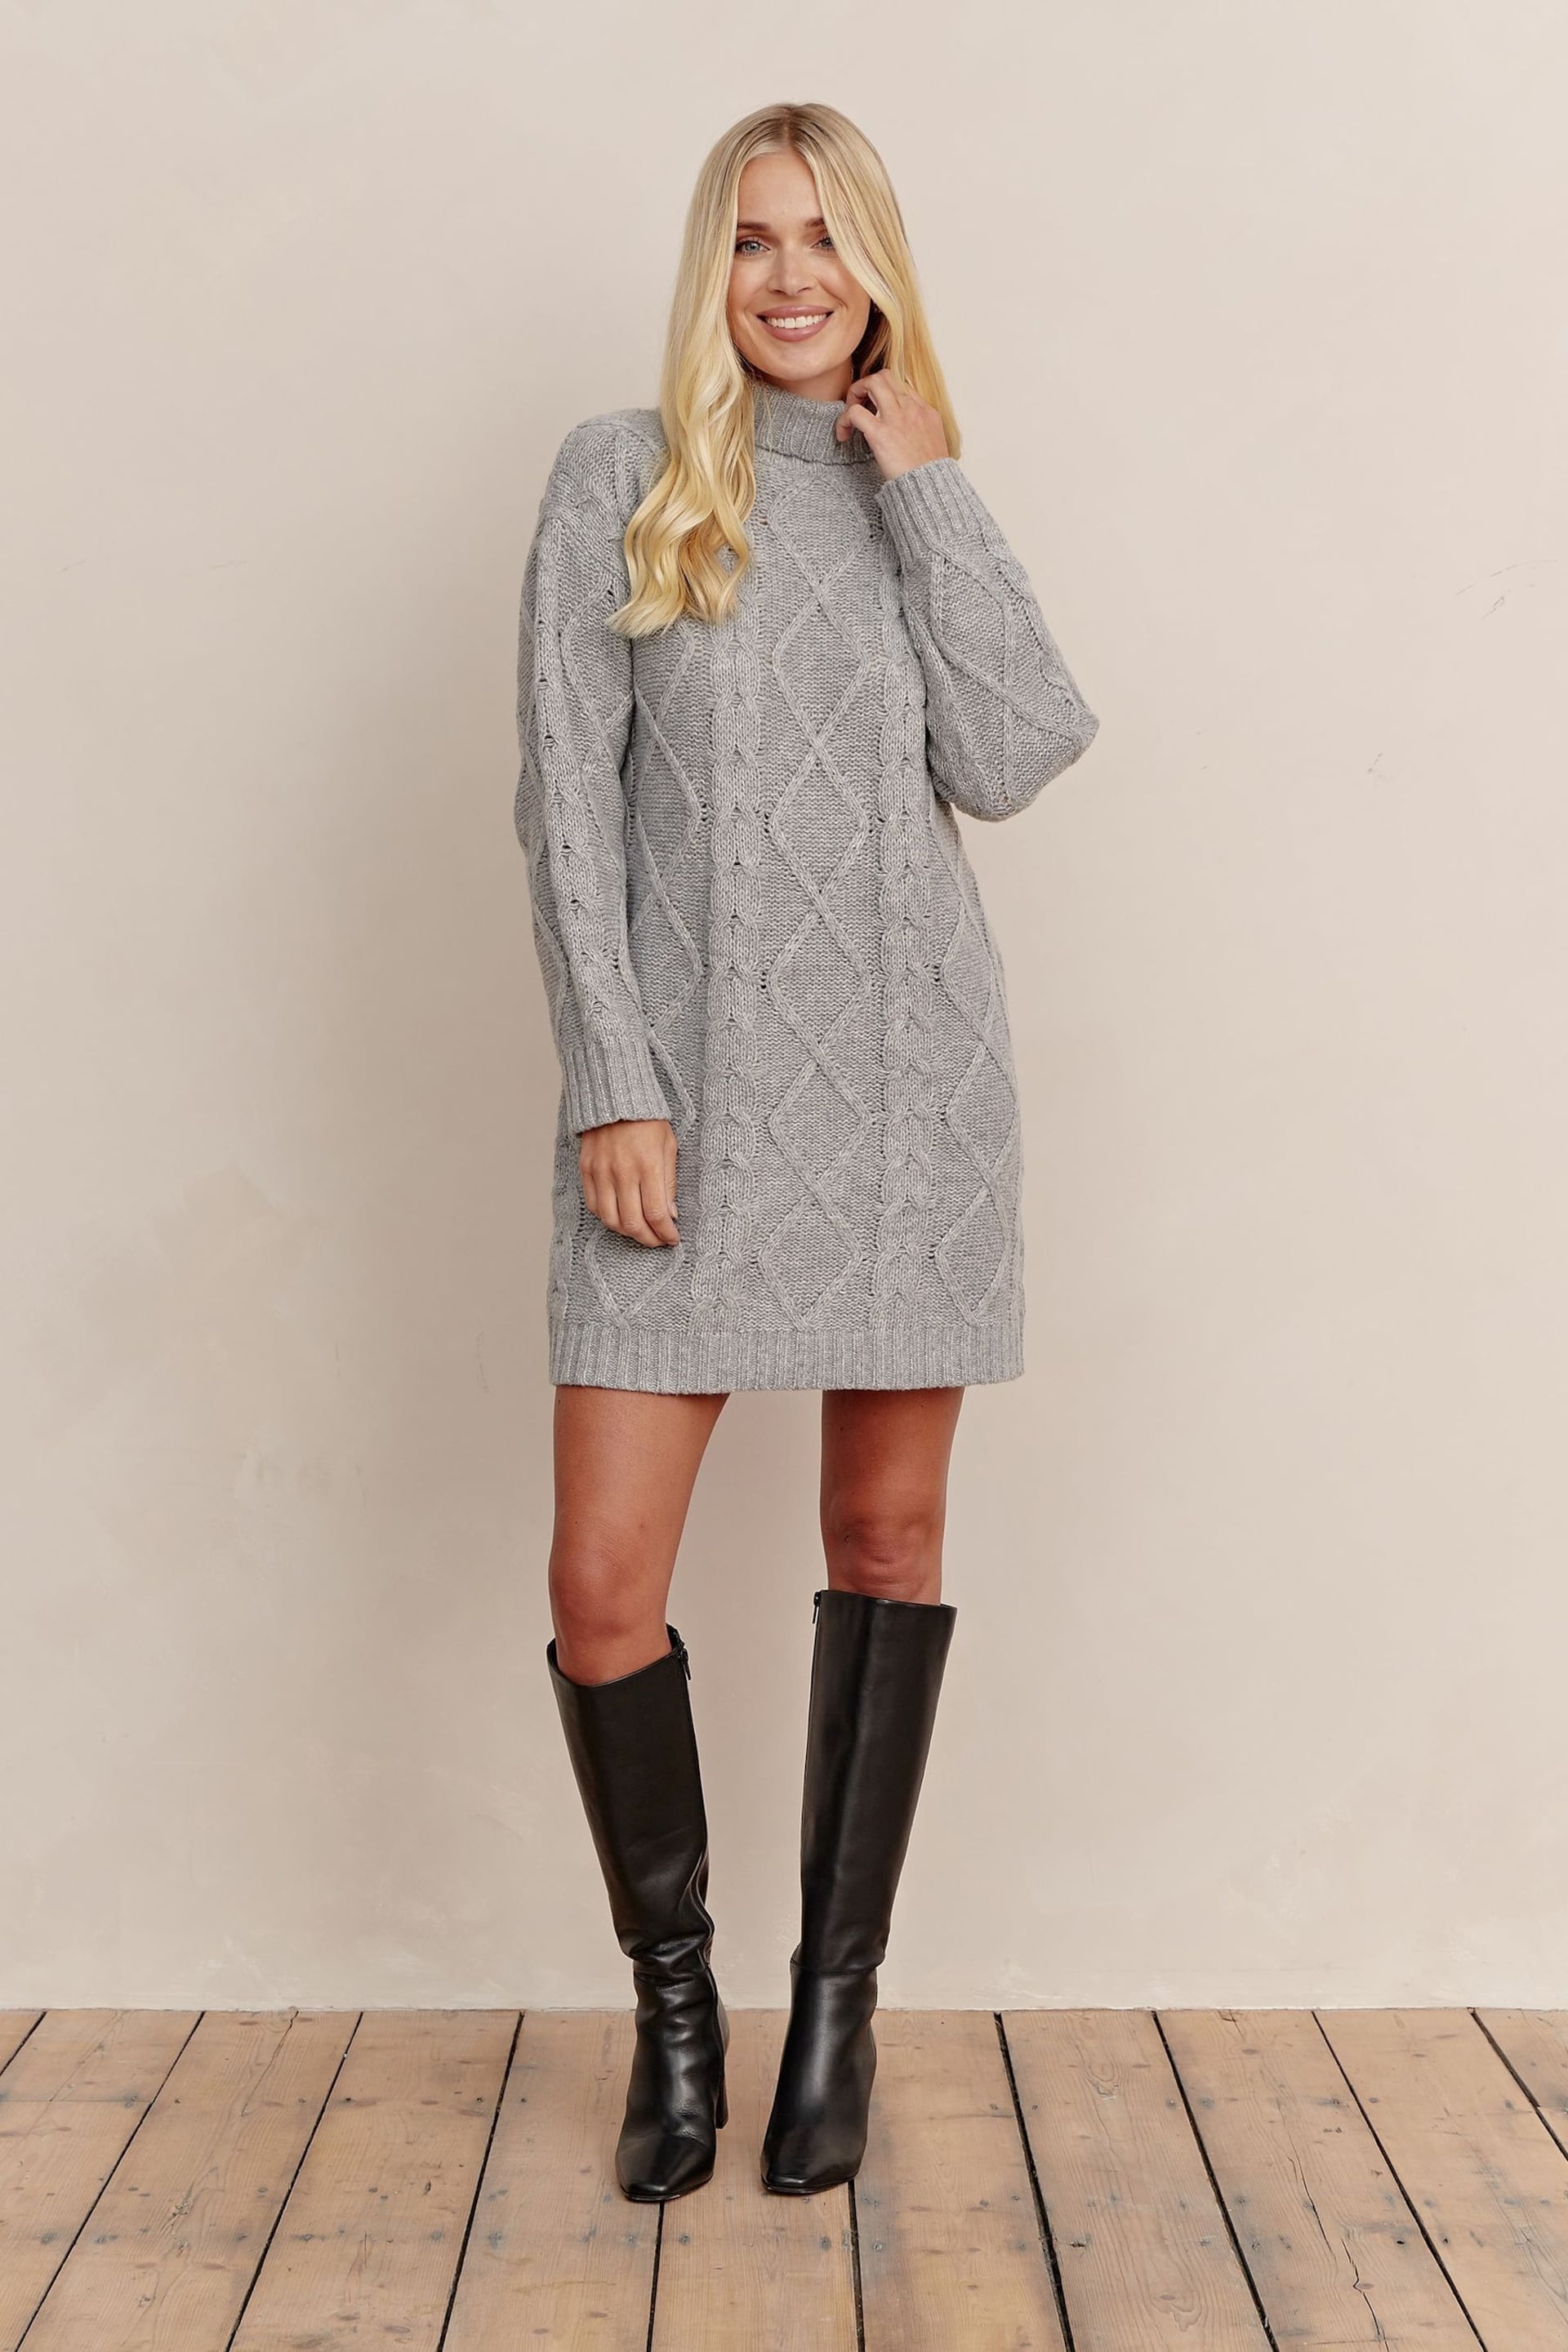 Society 8 Constance Grey Cable Knit Tunic Dress - Image 2 of 5